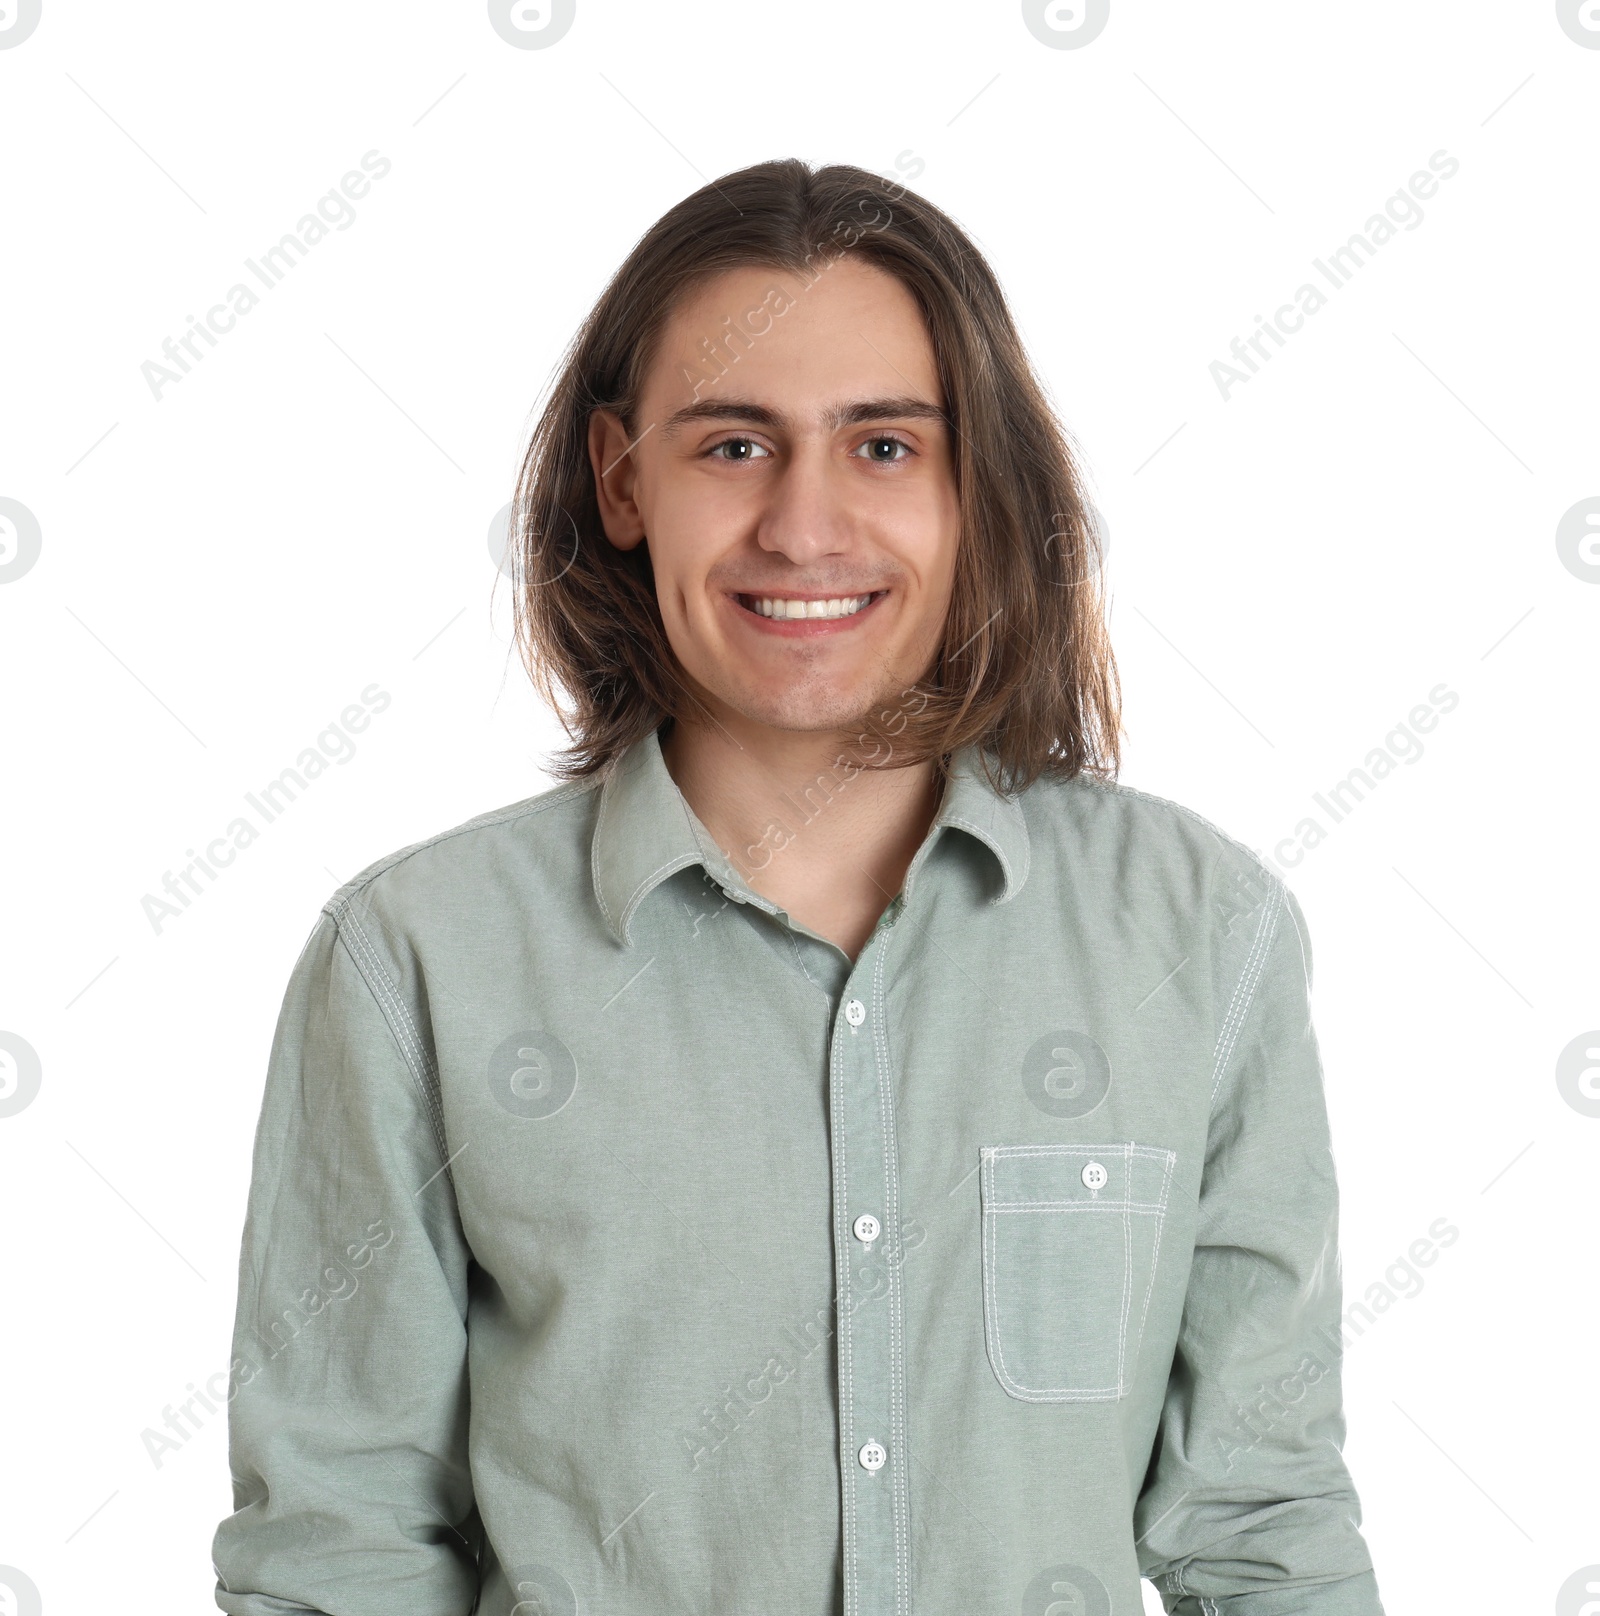 Photo of Portrait of happy young man on white background